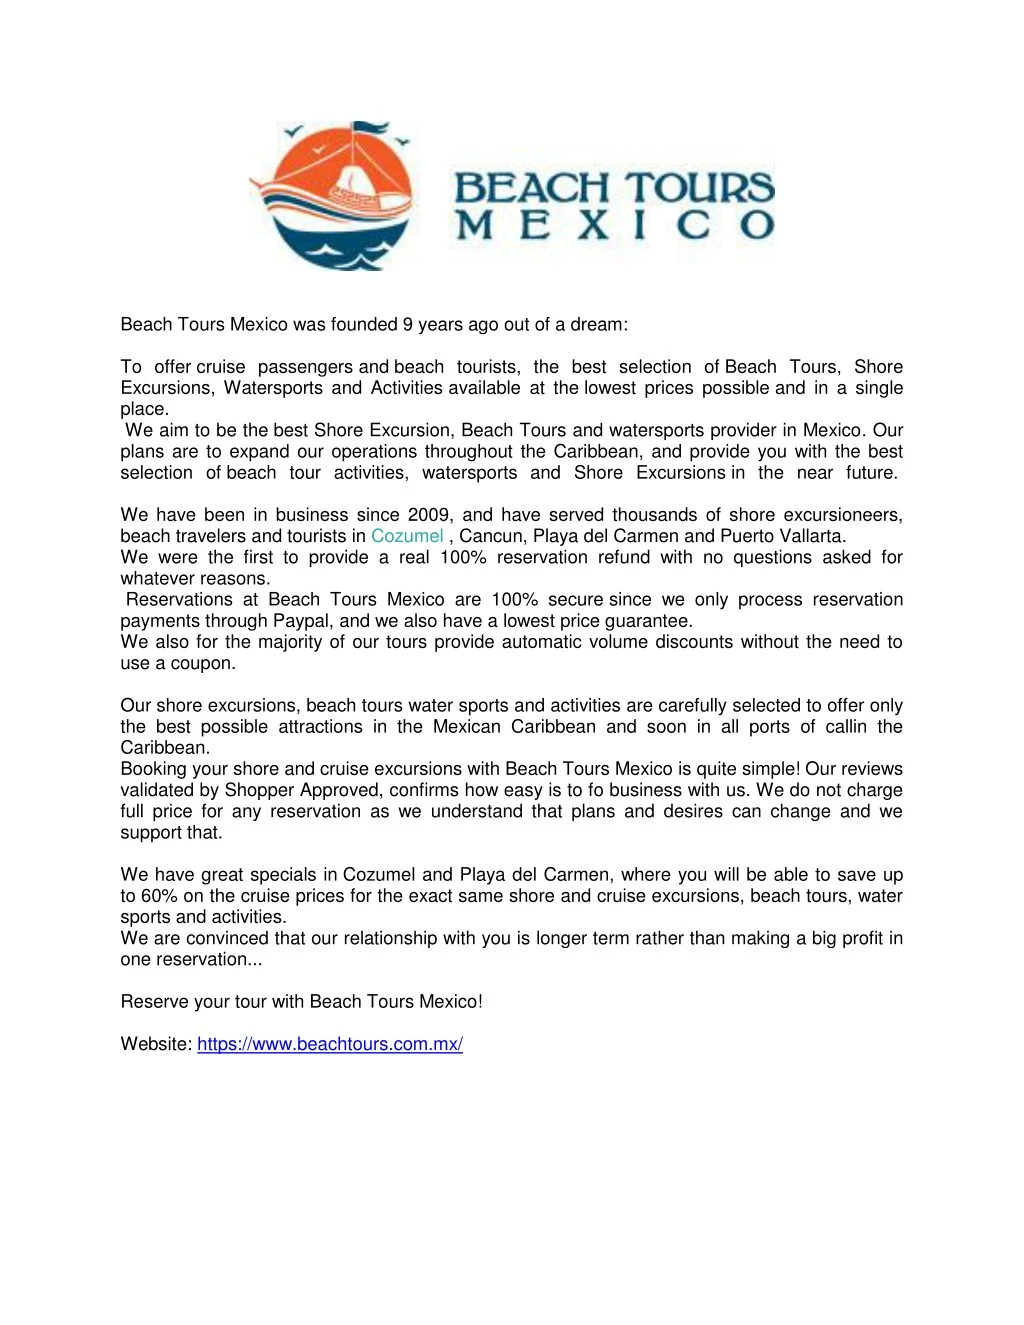 beach tours mexico was founded 9 years